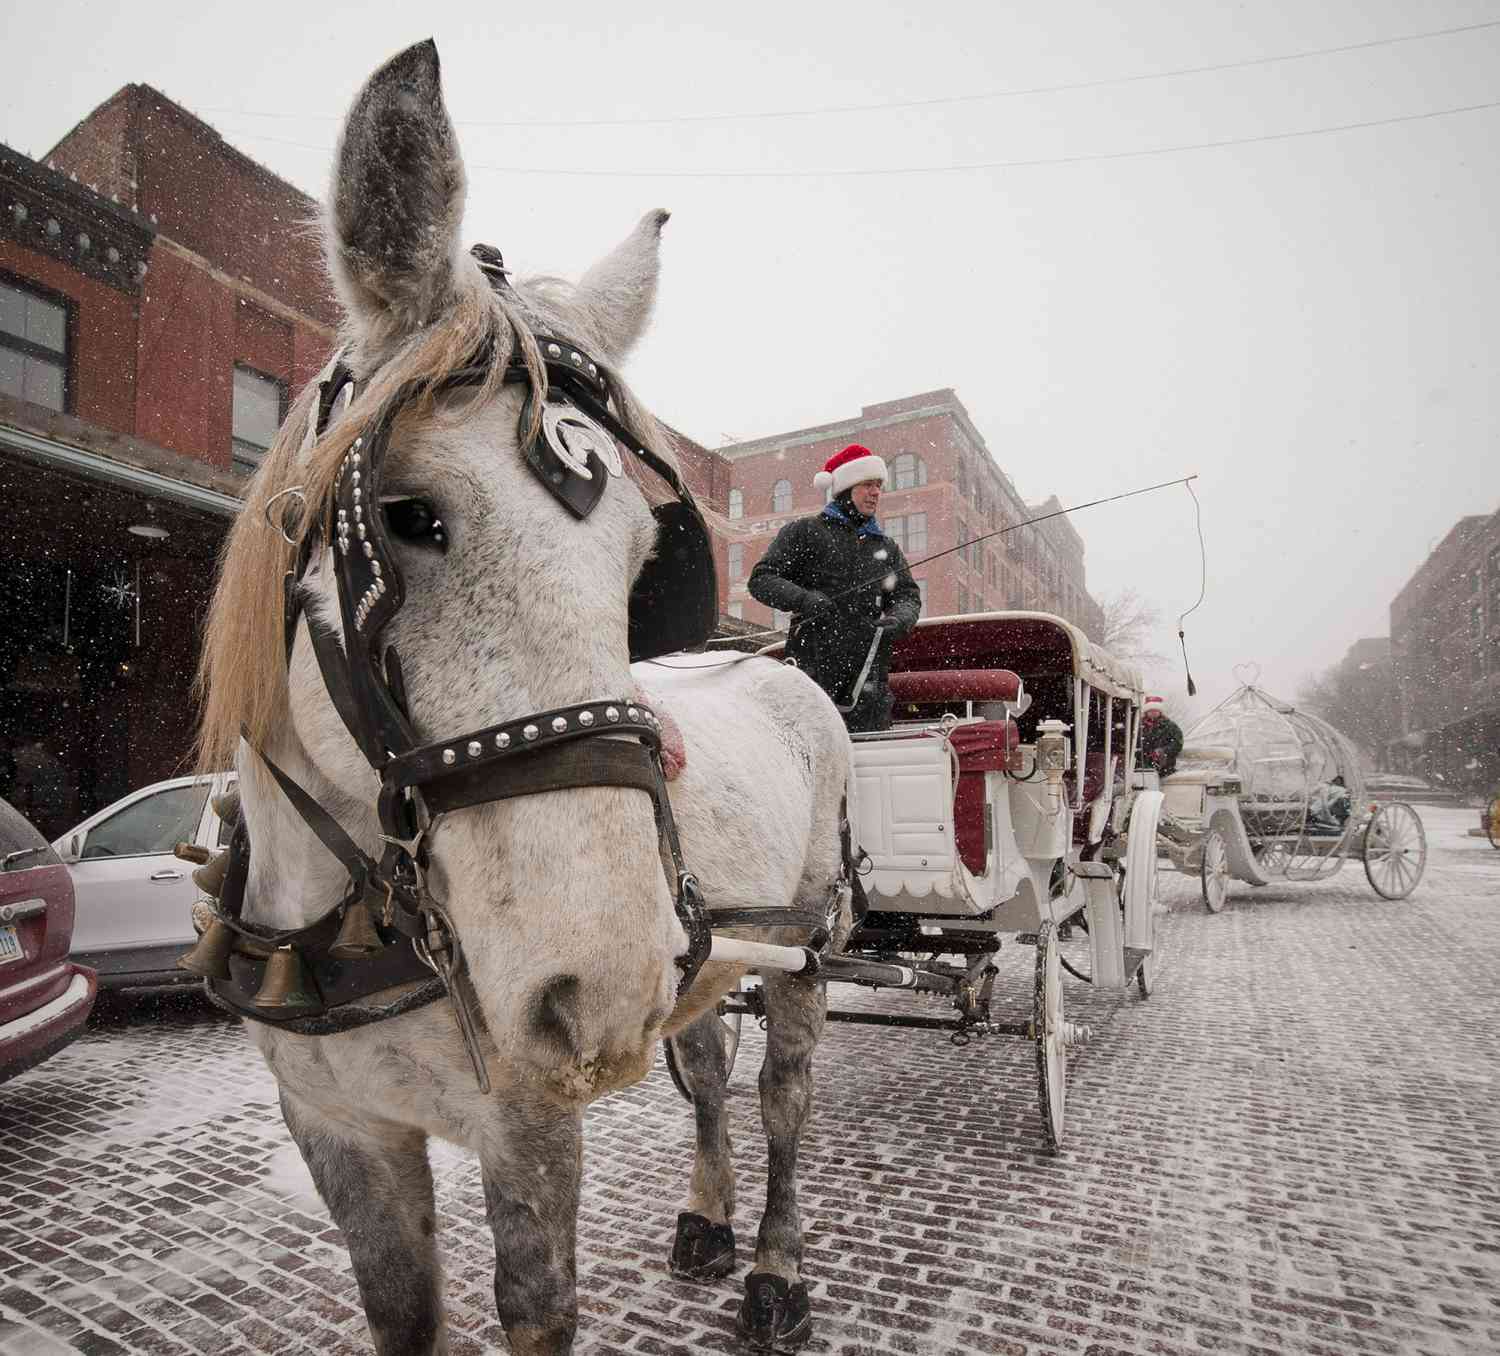 Carriage ride in Omaha, Nebraska, during the holidays